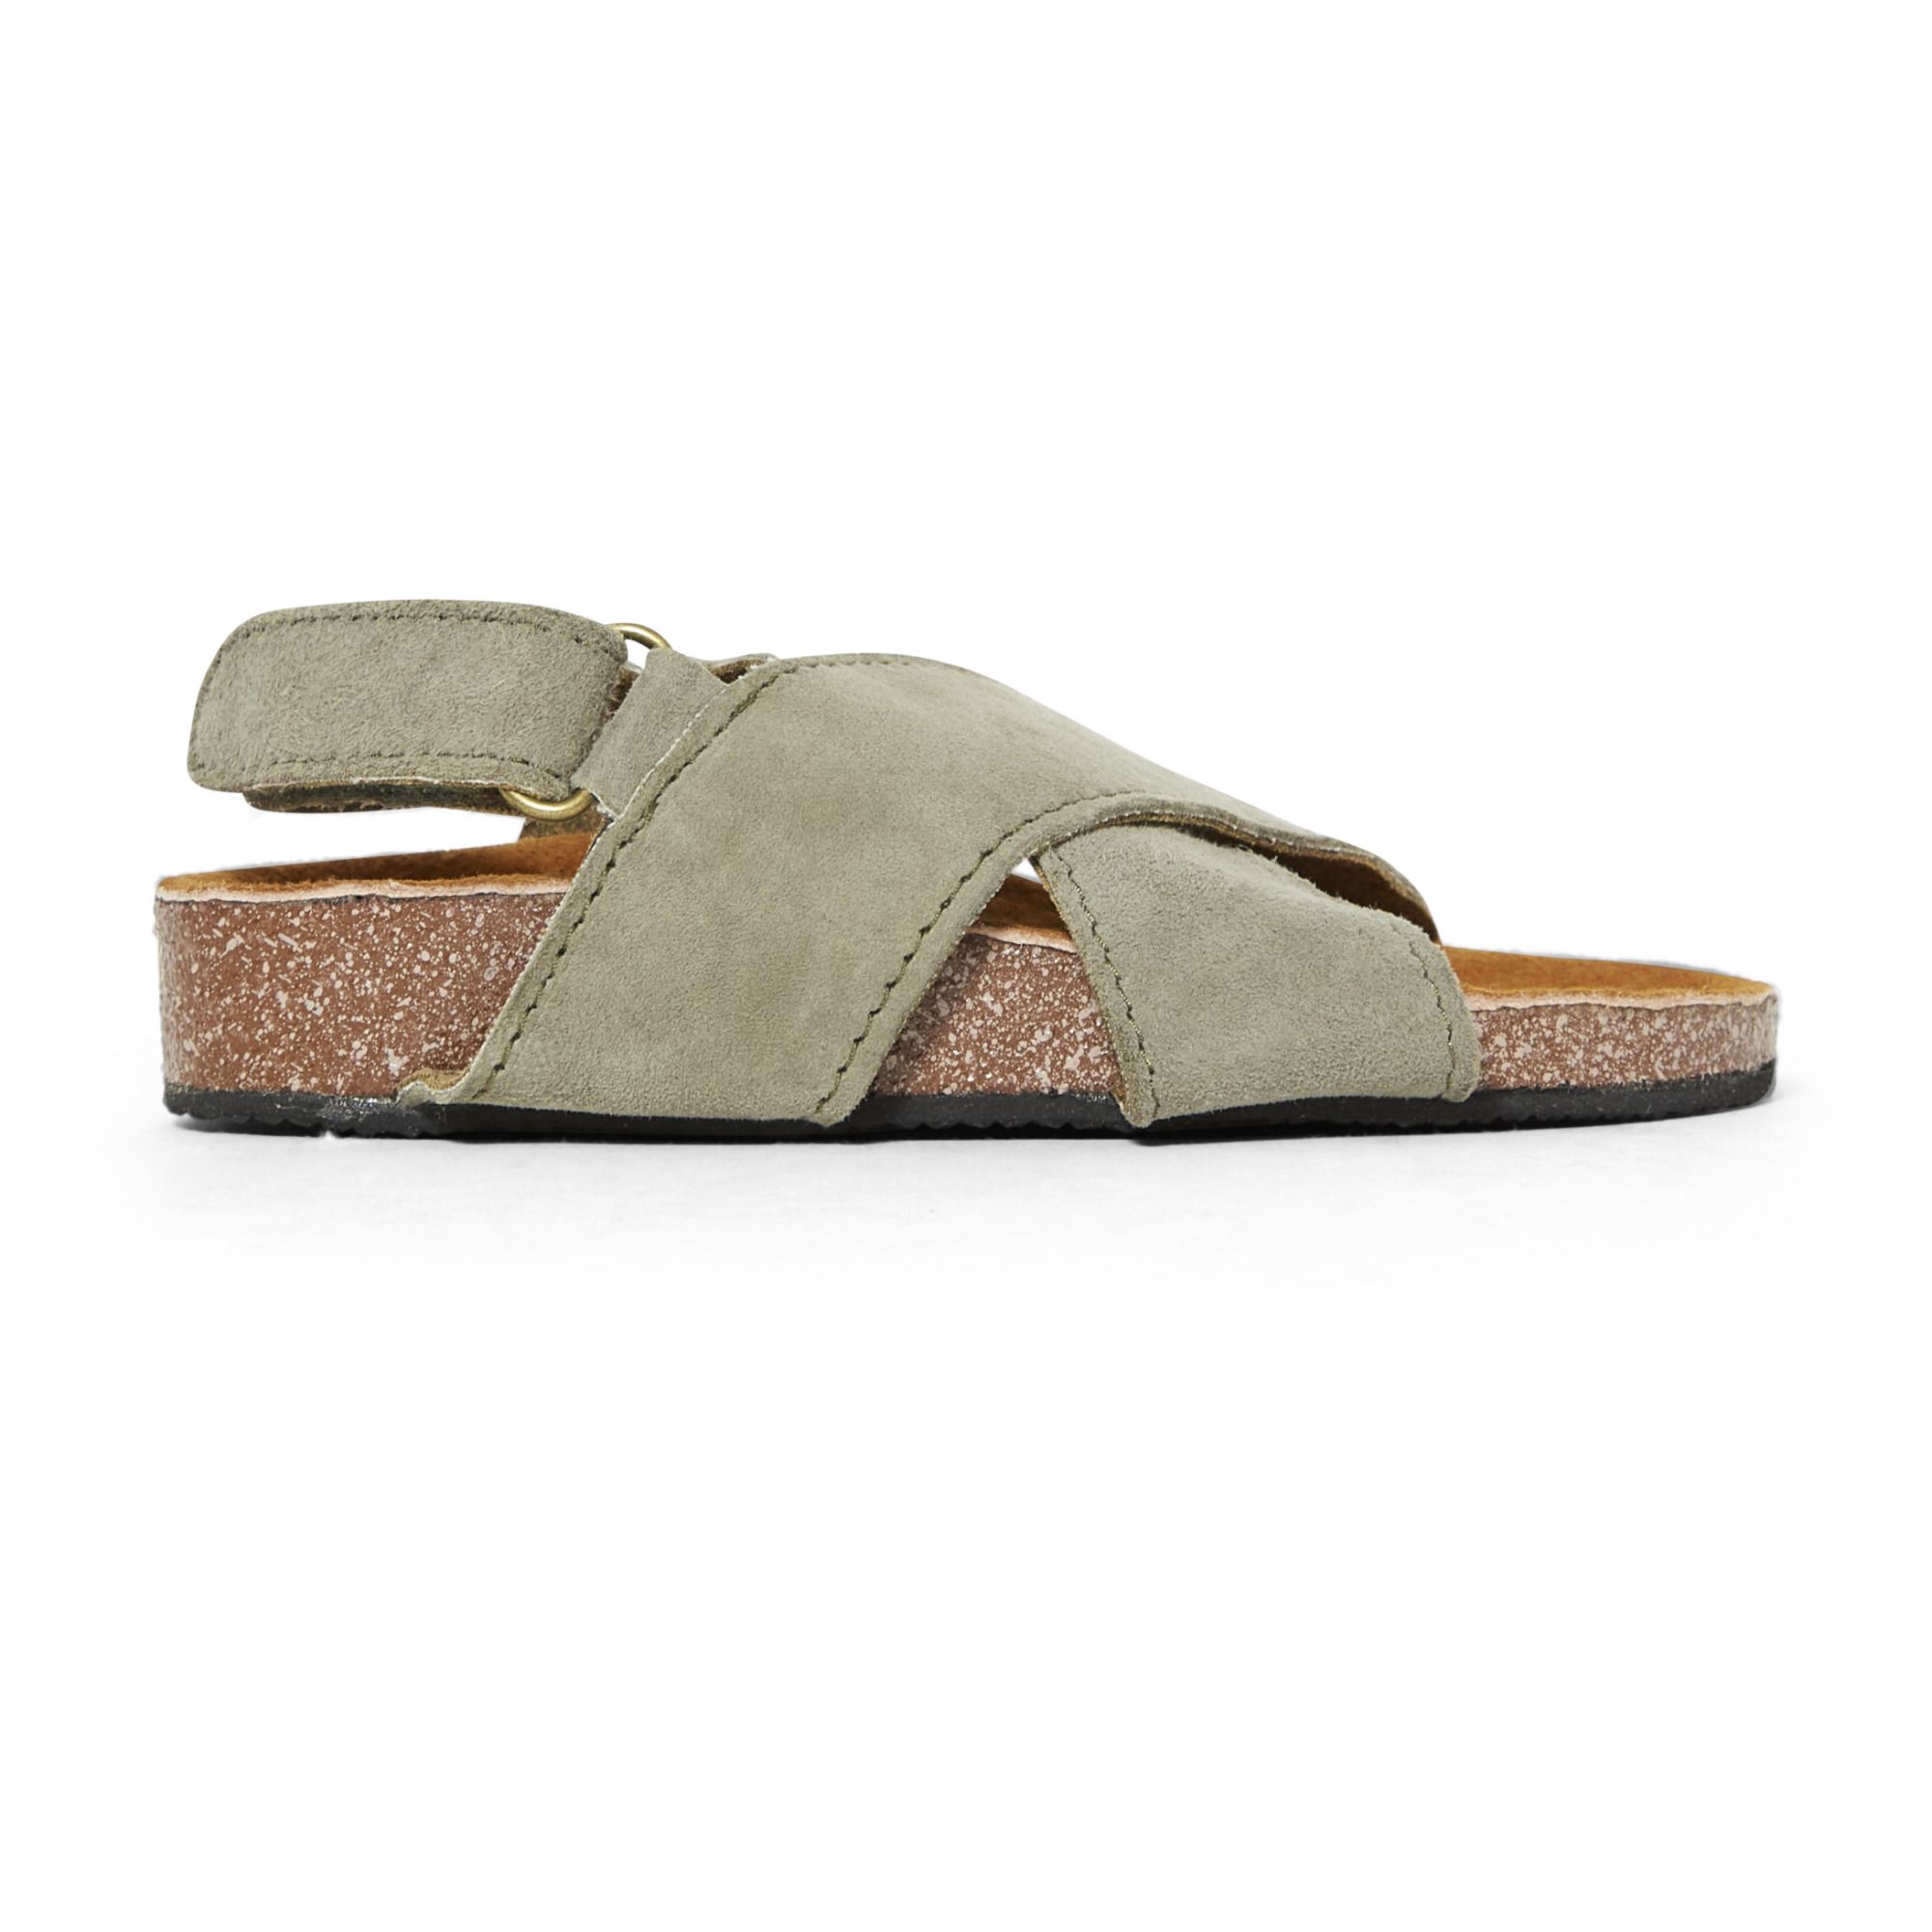 Scandic Gypsy - Sandales Suede Gypsy - Fille - Sauge